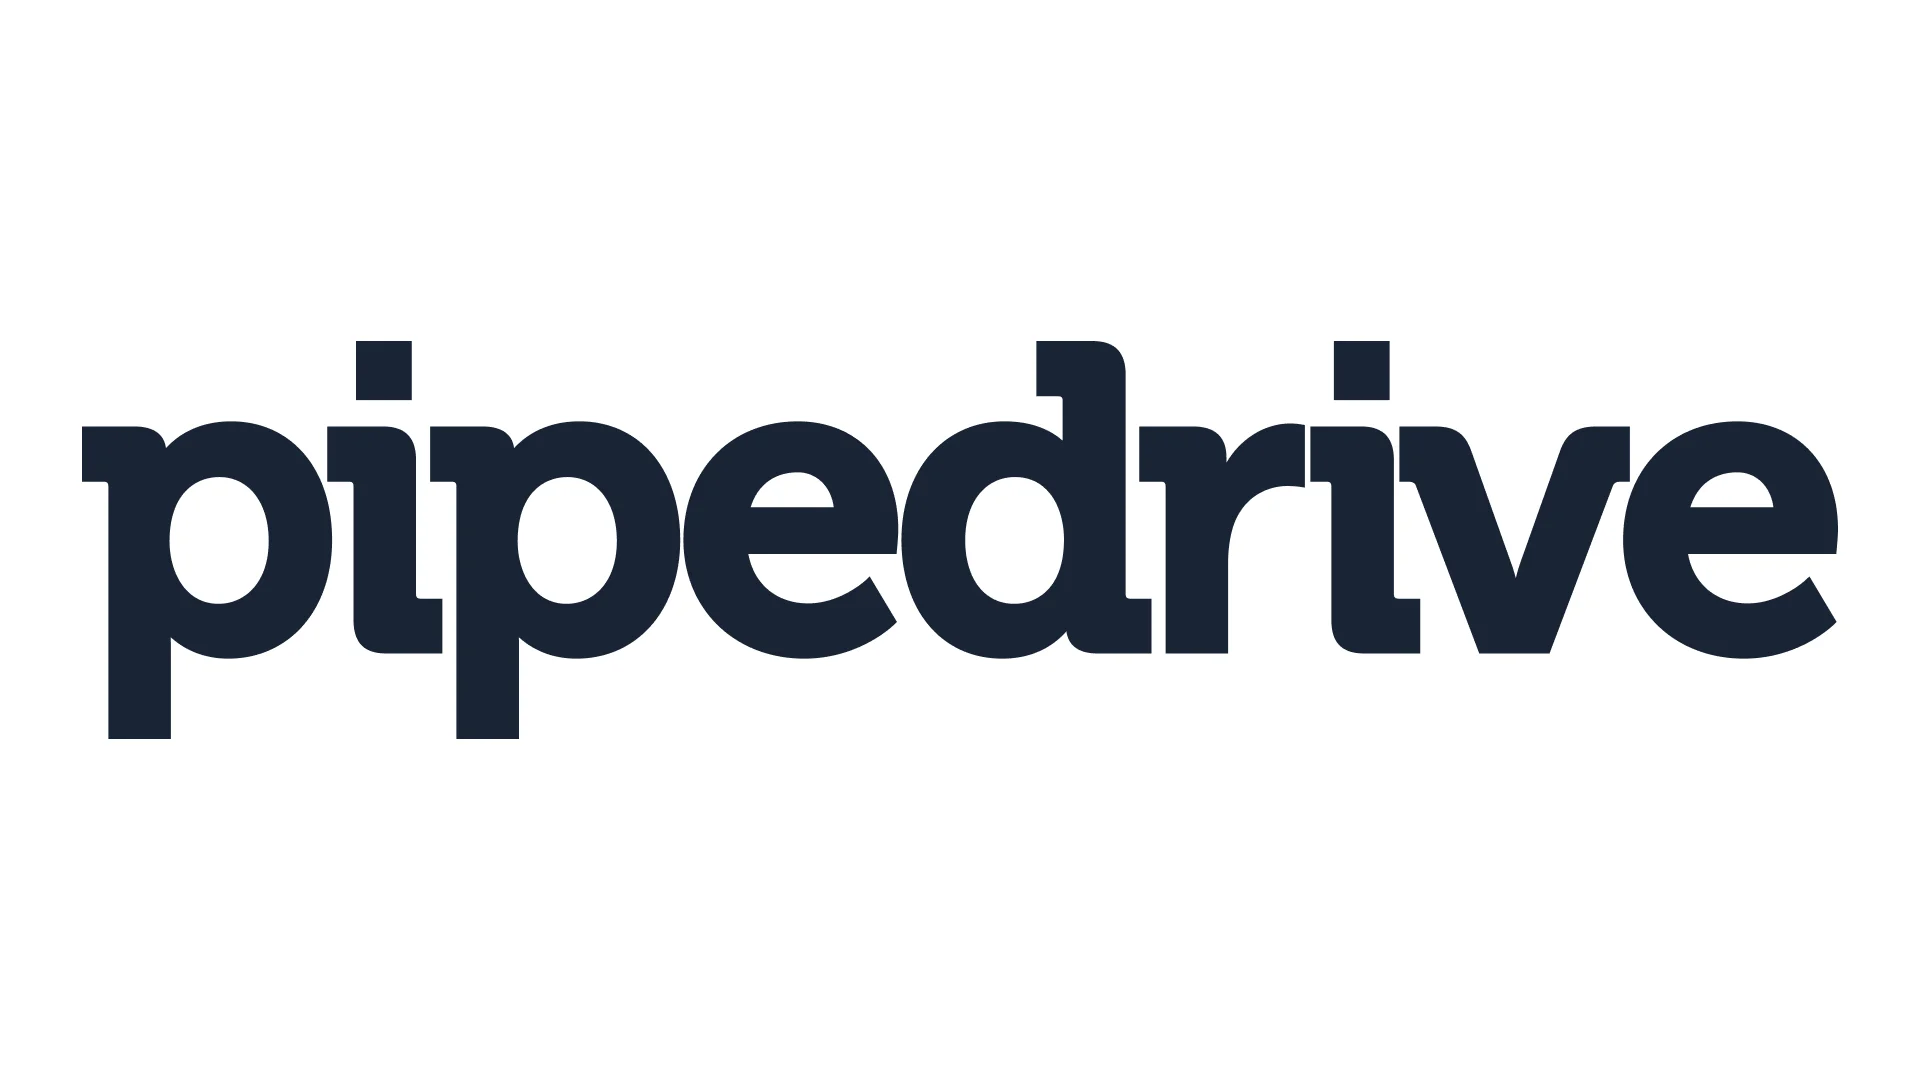 Pipedrive Contact Management Software.